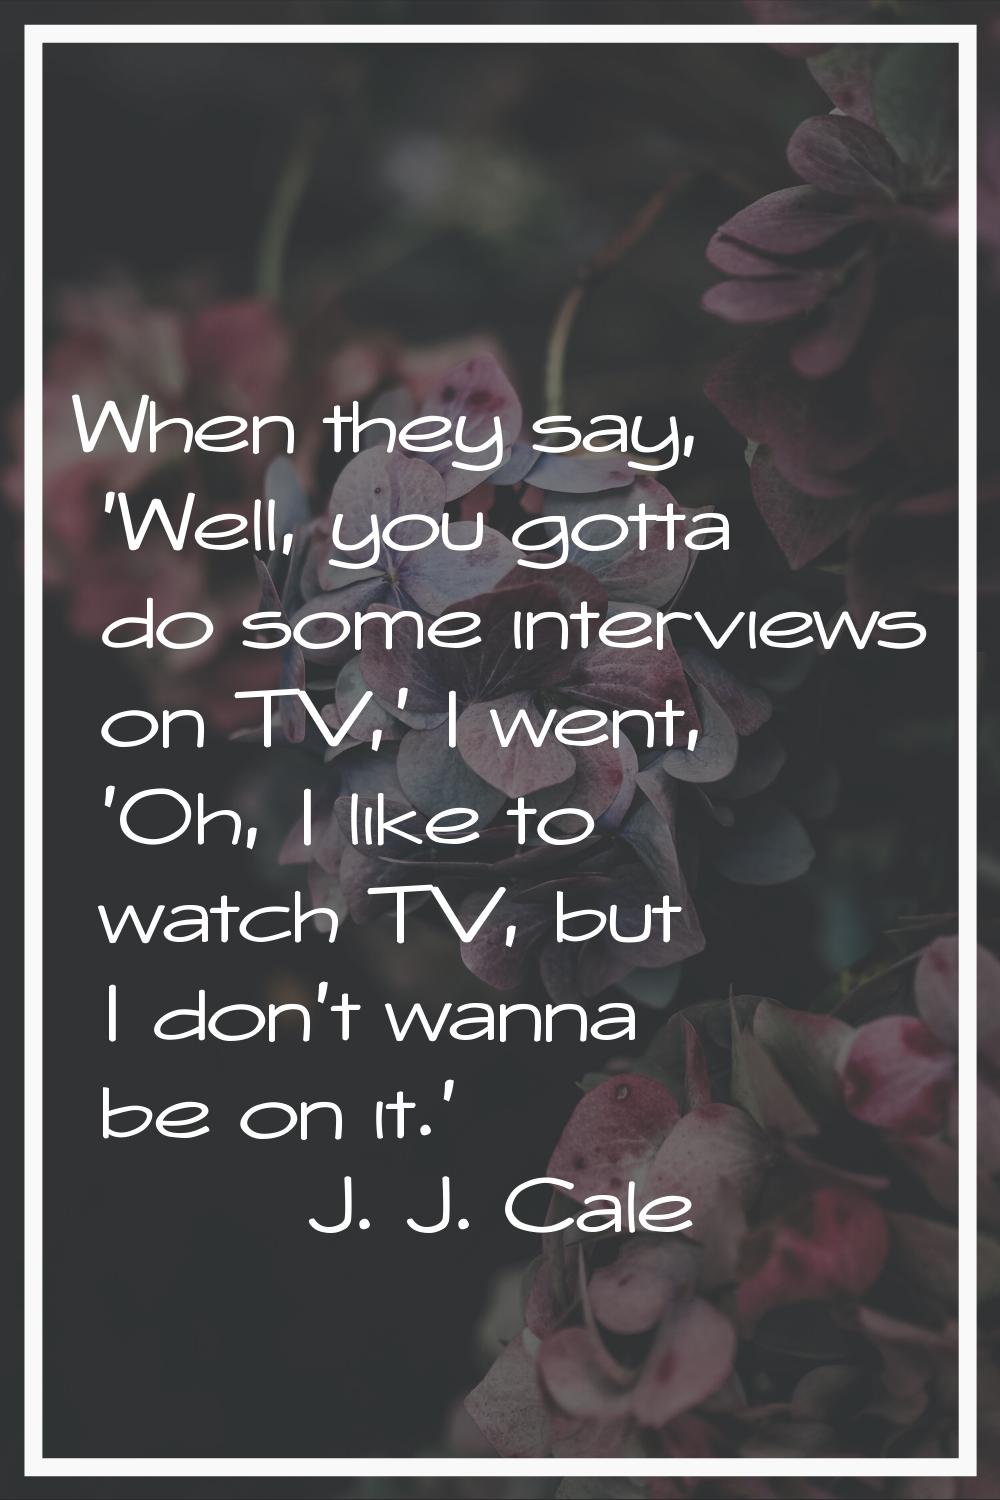 When they say, 'Well, you gotta do some interviews on TV,' I went, 'Oh, I like to watch TV, but I d